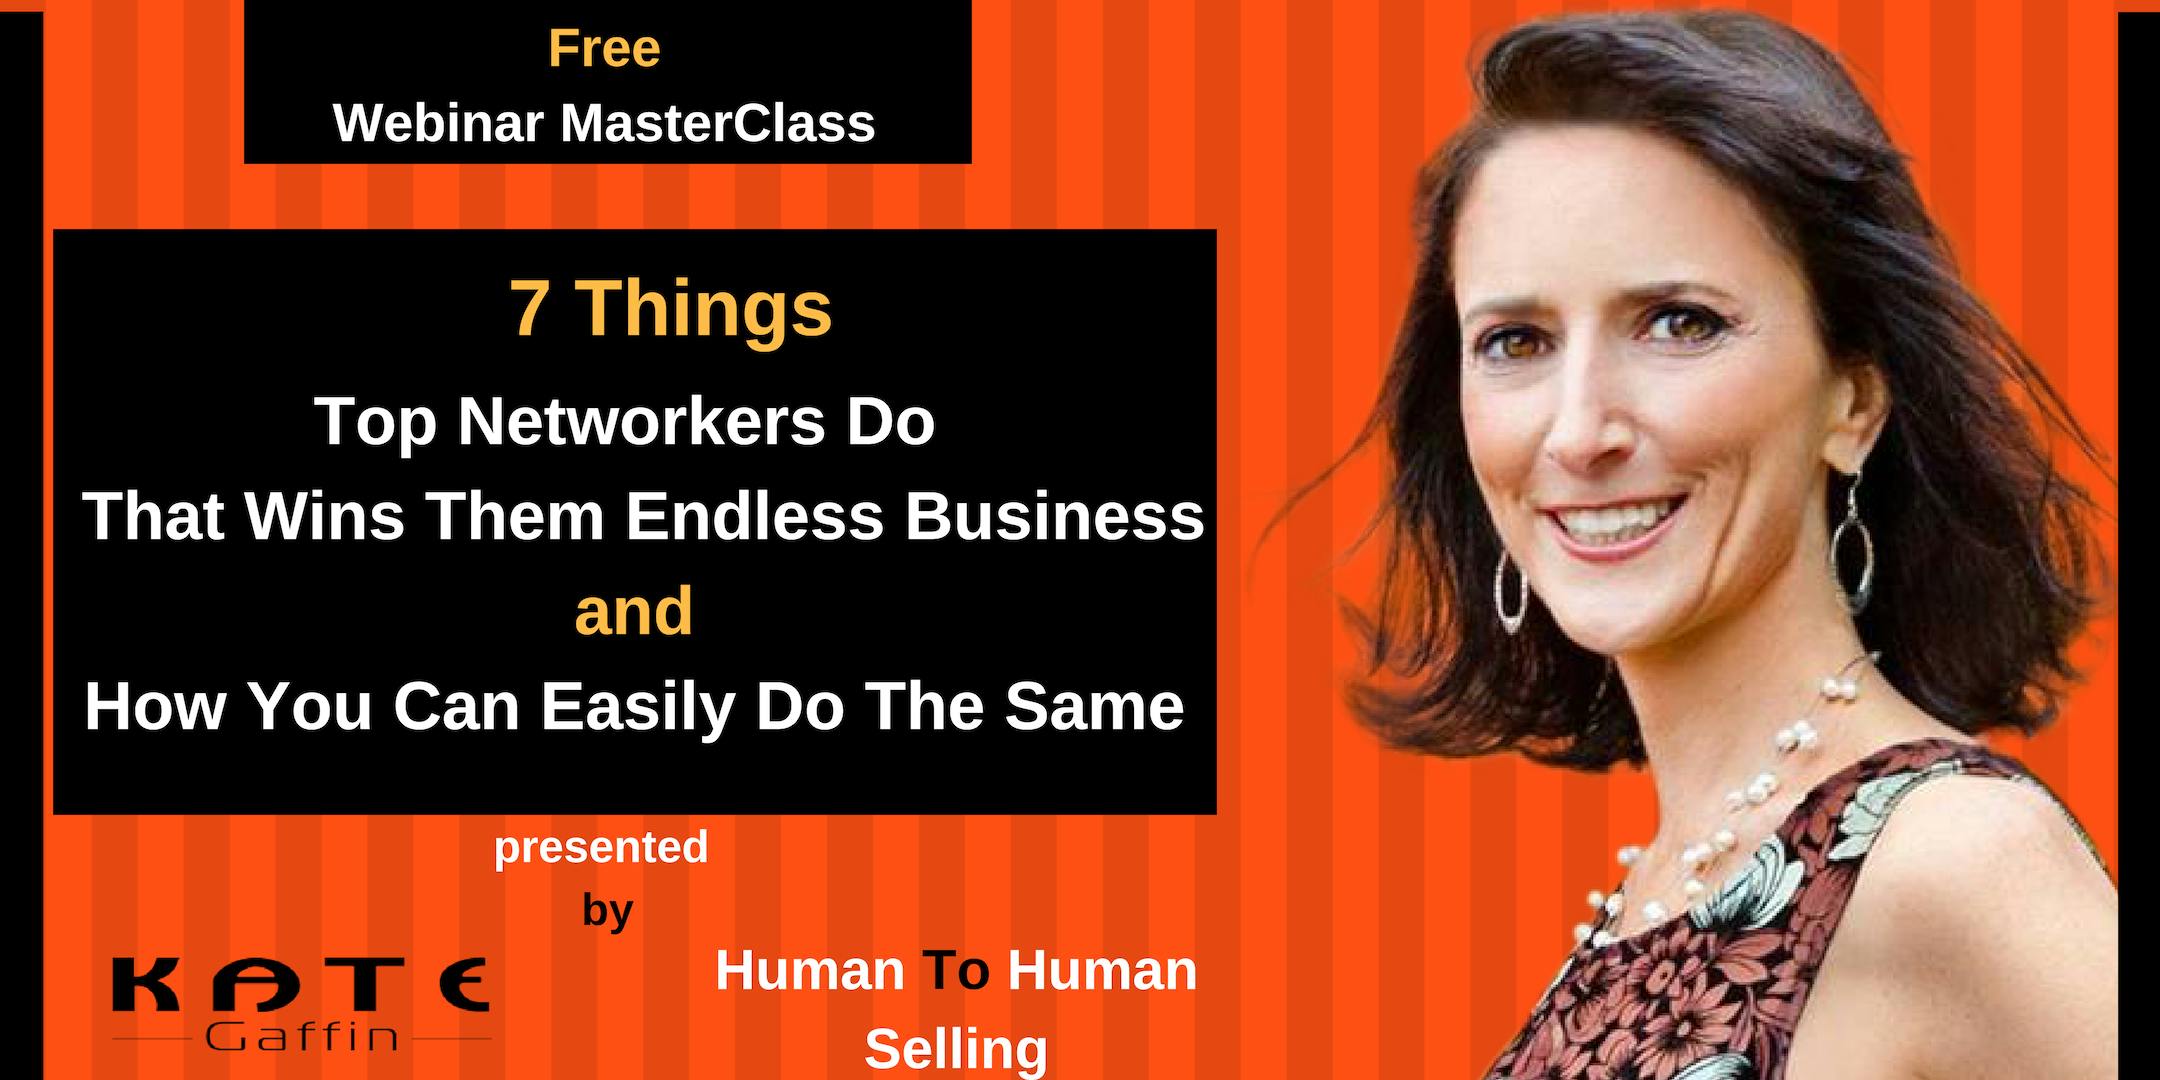  7 Things Top Networkers Do That Wins Them Endless Business...And How You Can Easily Do The Same - Free Webinar MasterClass (Networking and Business)